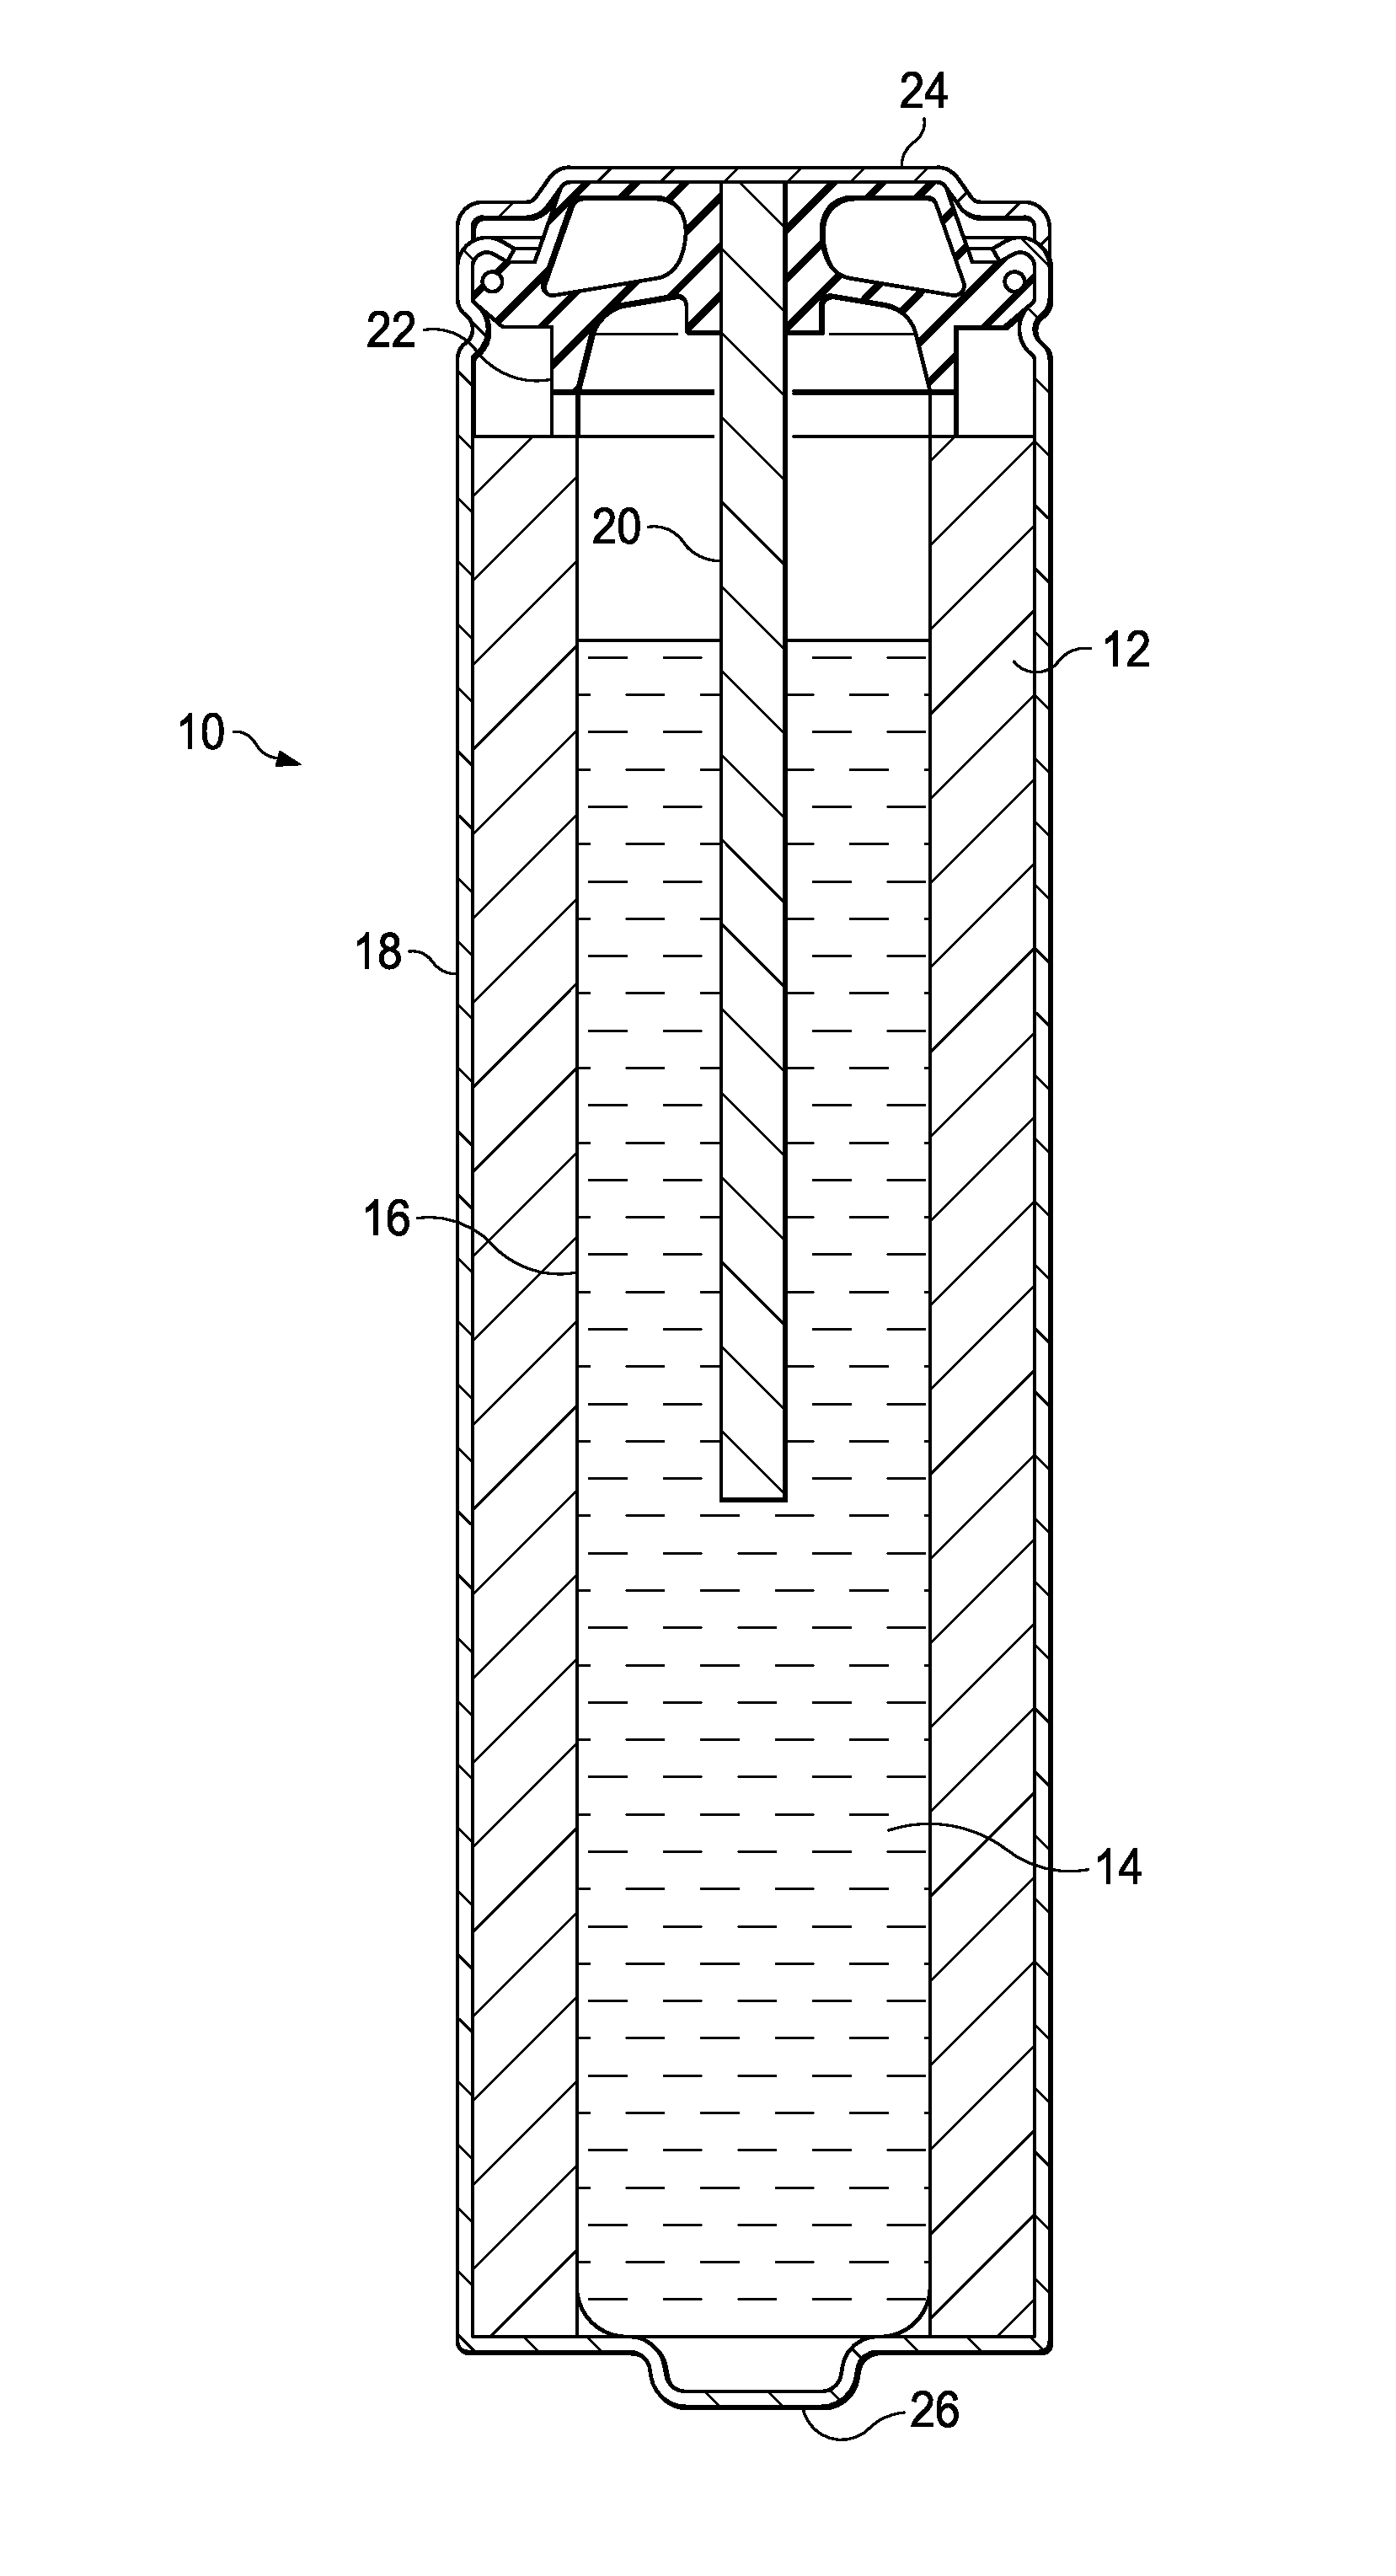 Beta-delithiated layered nickel oxide electrochemically active cathode material and a battery including said material